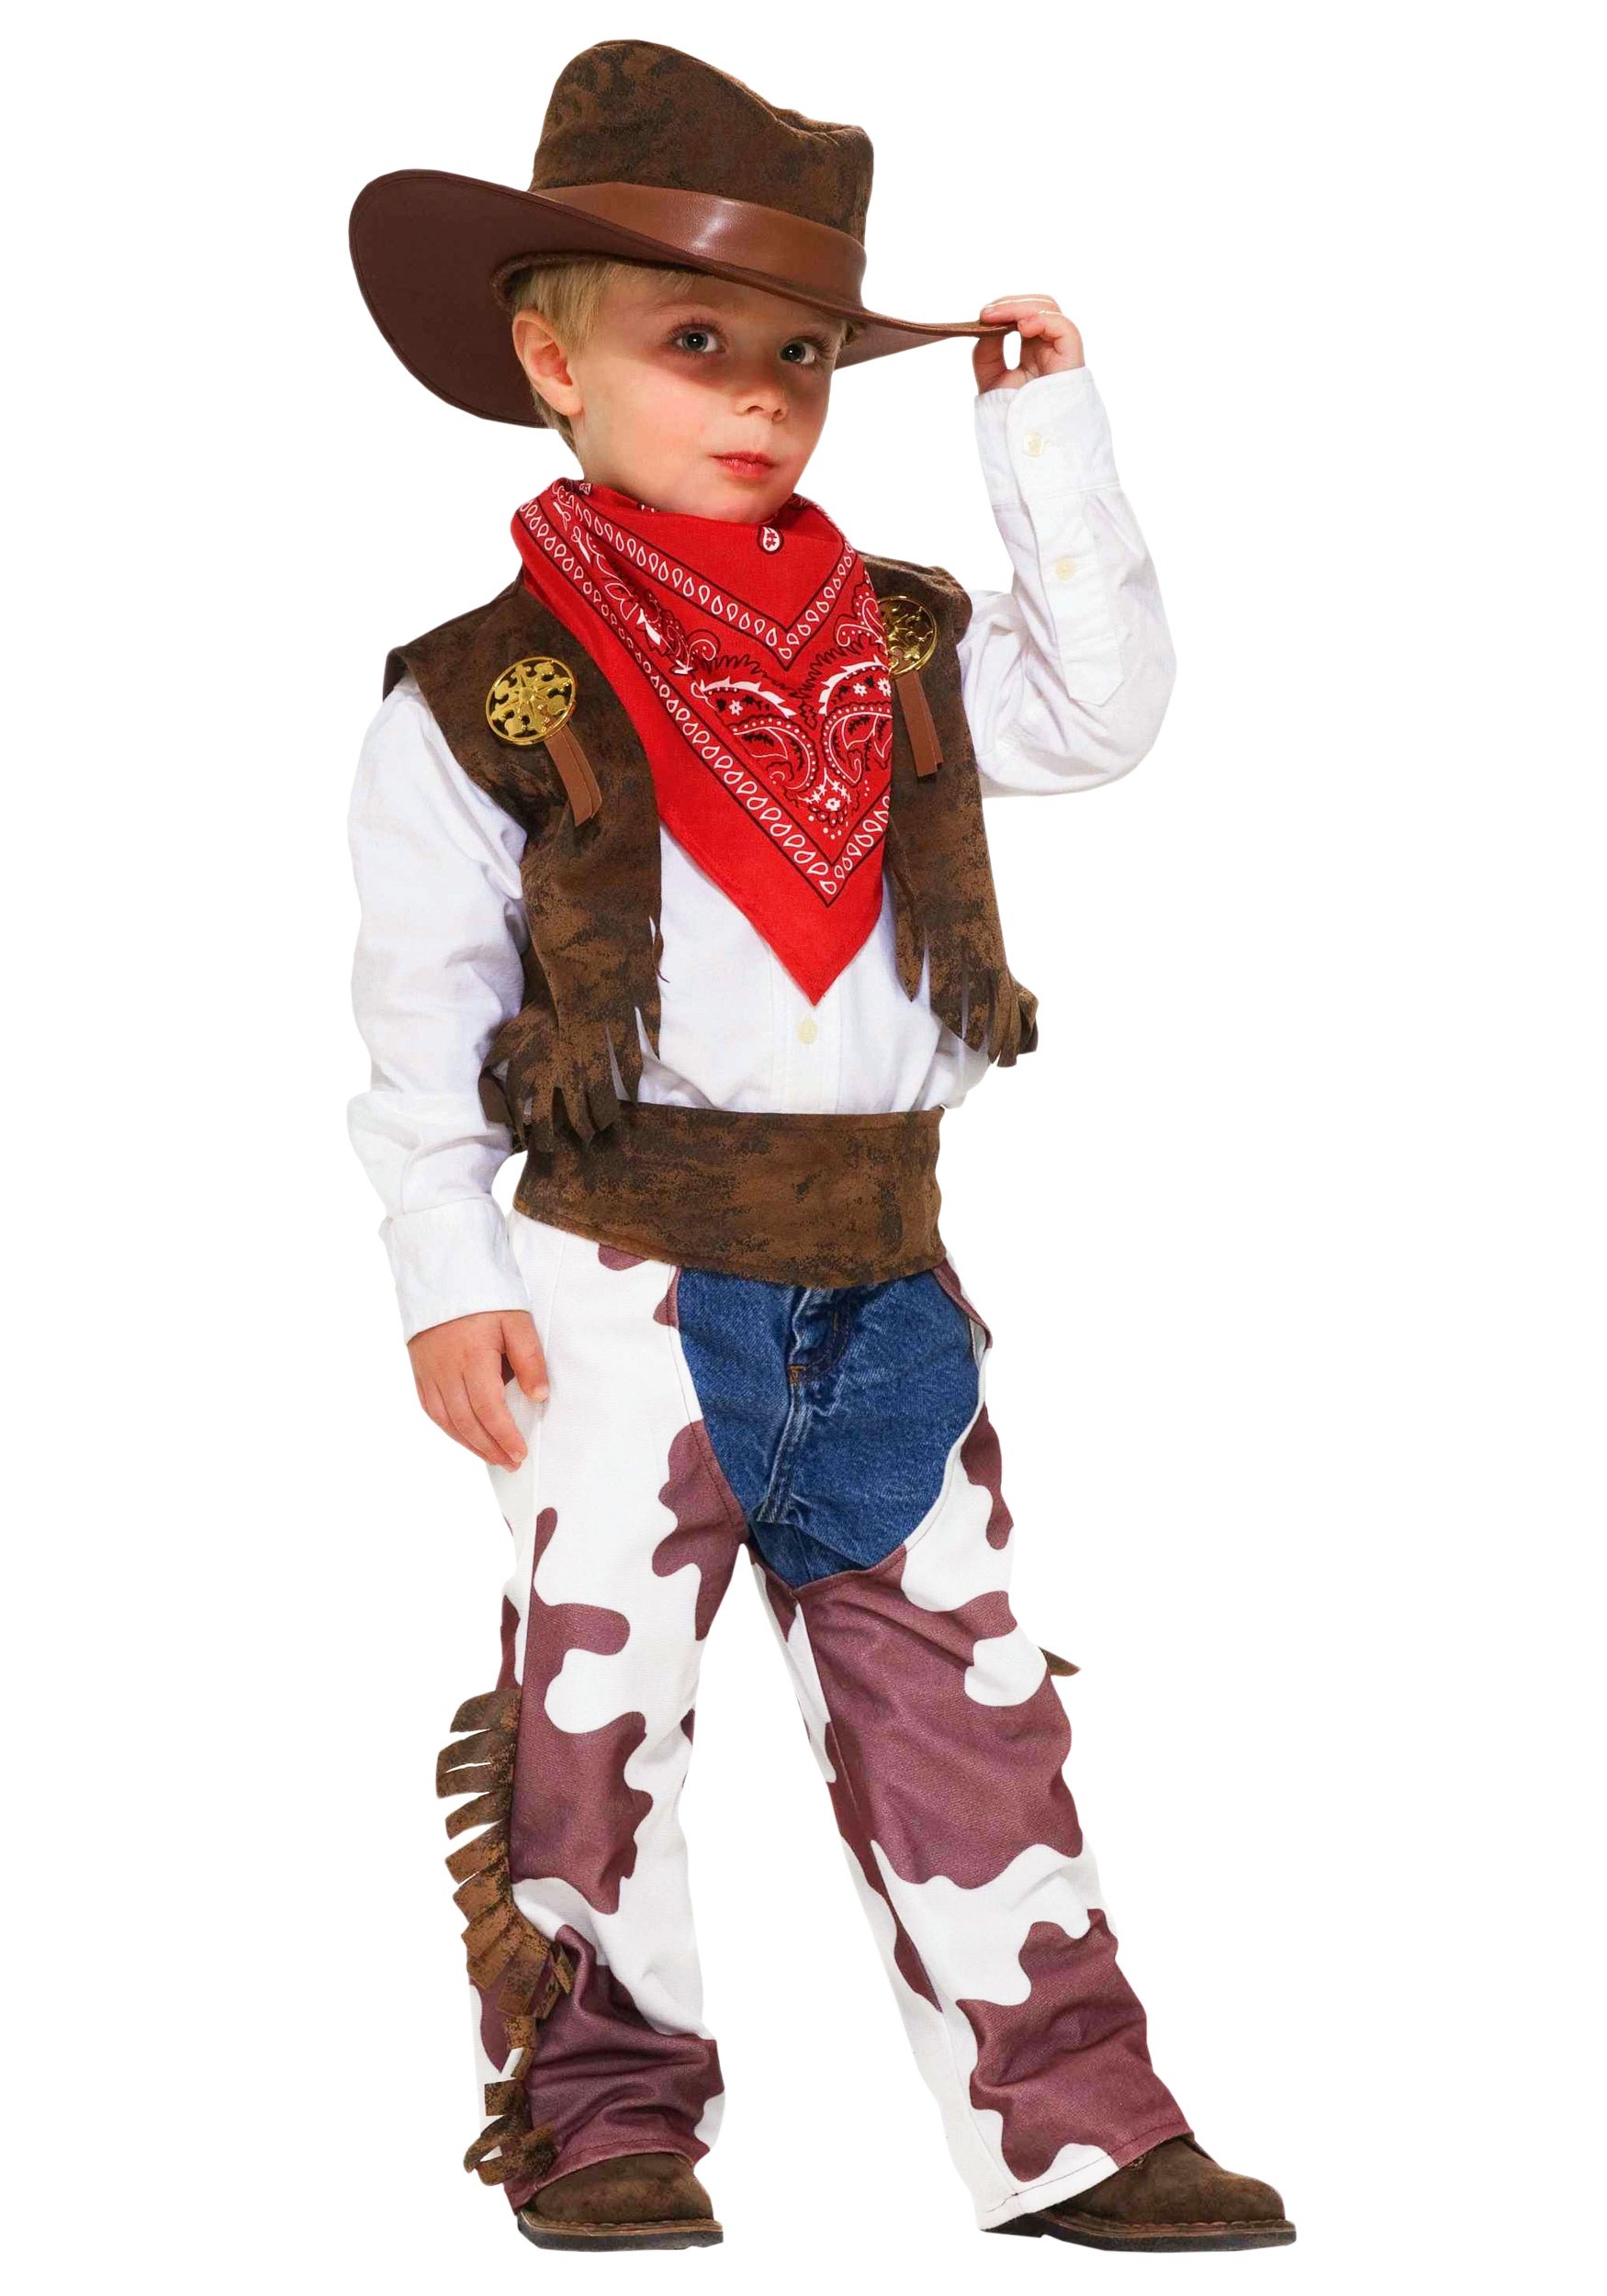 https://images.halloweencostumes.ca/products/15649/1-1/toddler-cowboy-costume.jpg